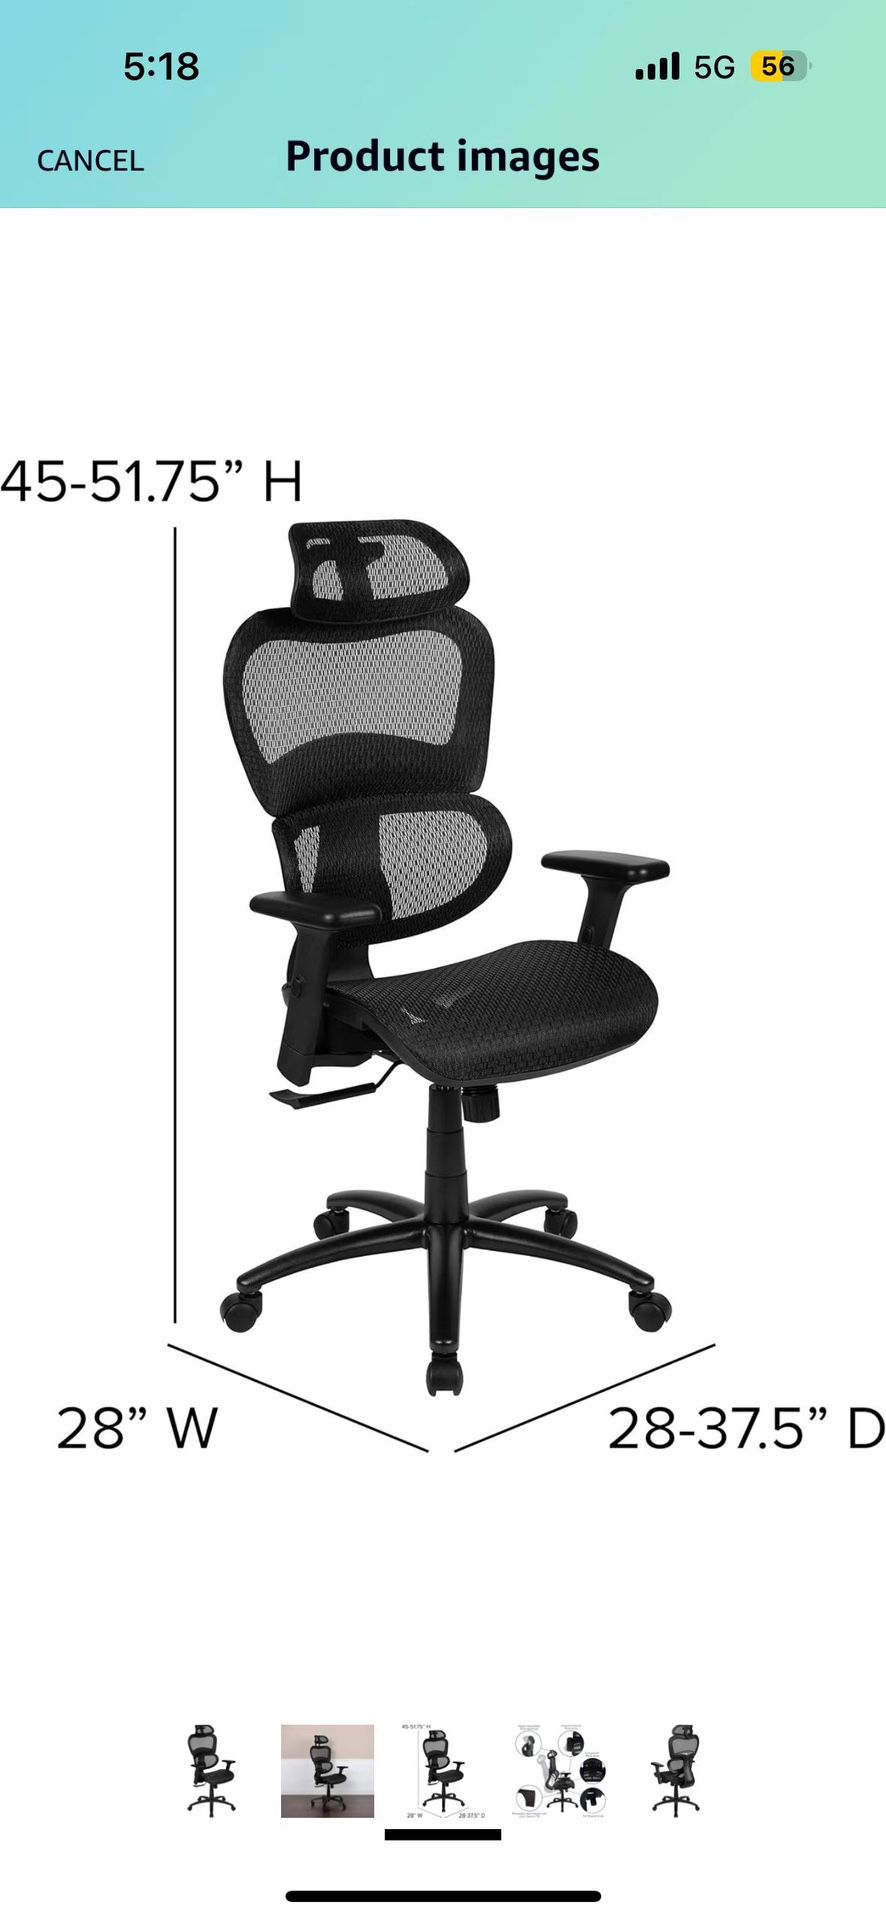 Furniture LO Ergonomic Mesh Office Chair with 2-to-1 Synchro-Tilt, Adjustable Headrest, Lumbar Support, and Adjustable Pivot Arms in Black